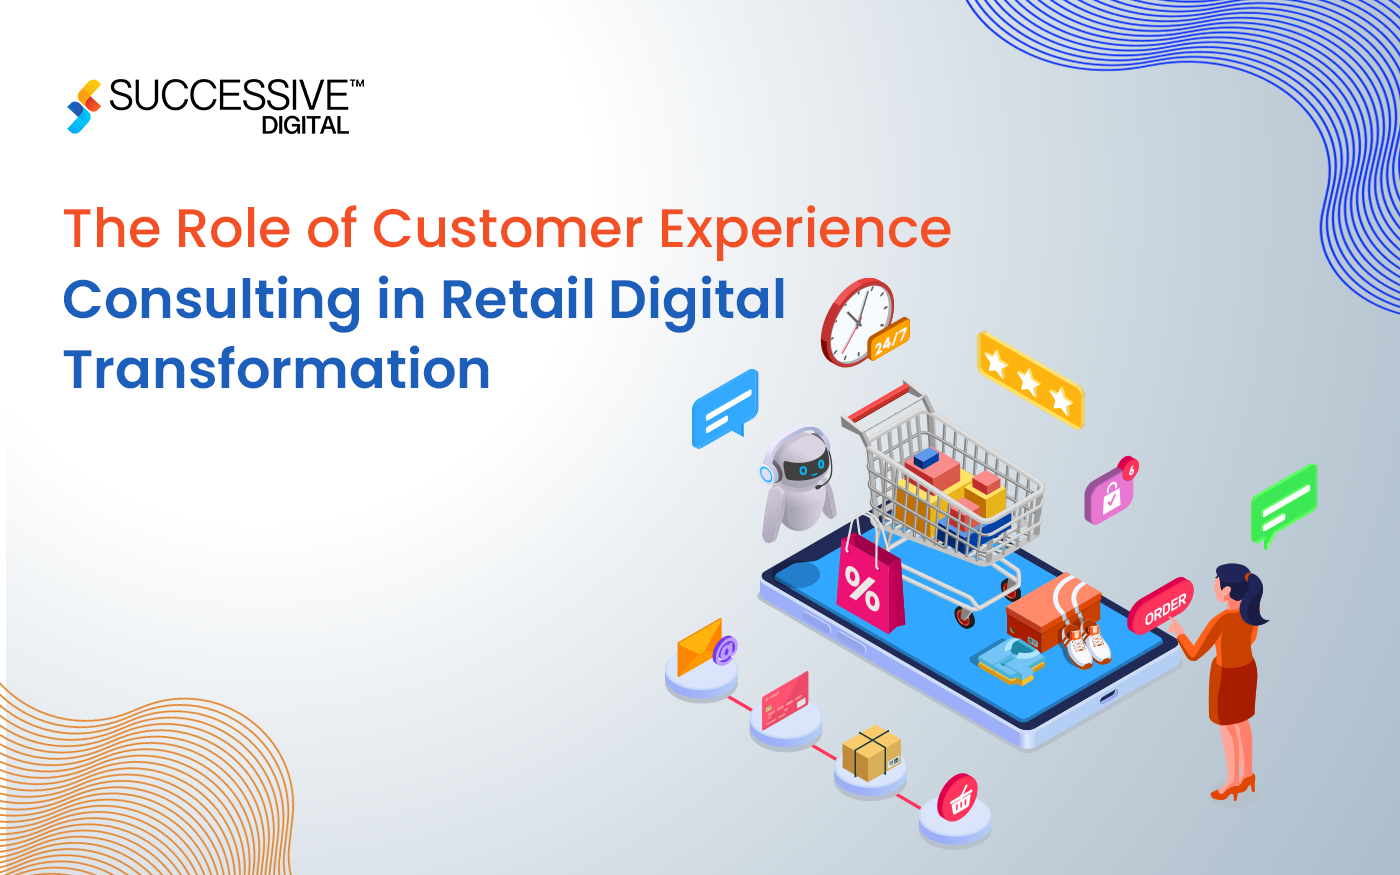 The Role of Customer Experience Consulting in Retail Digital Transformation